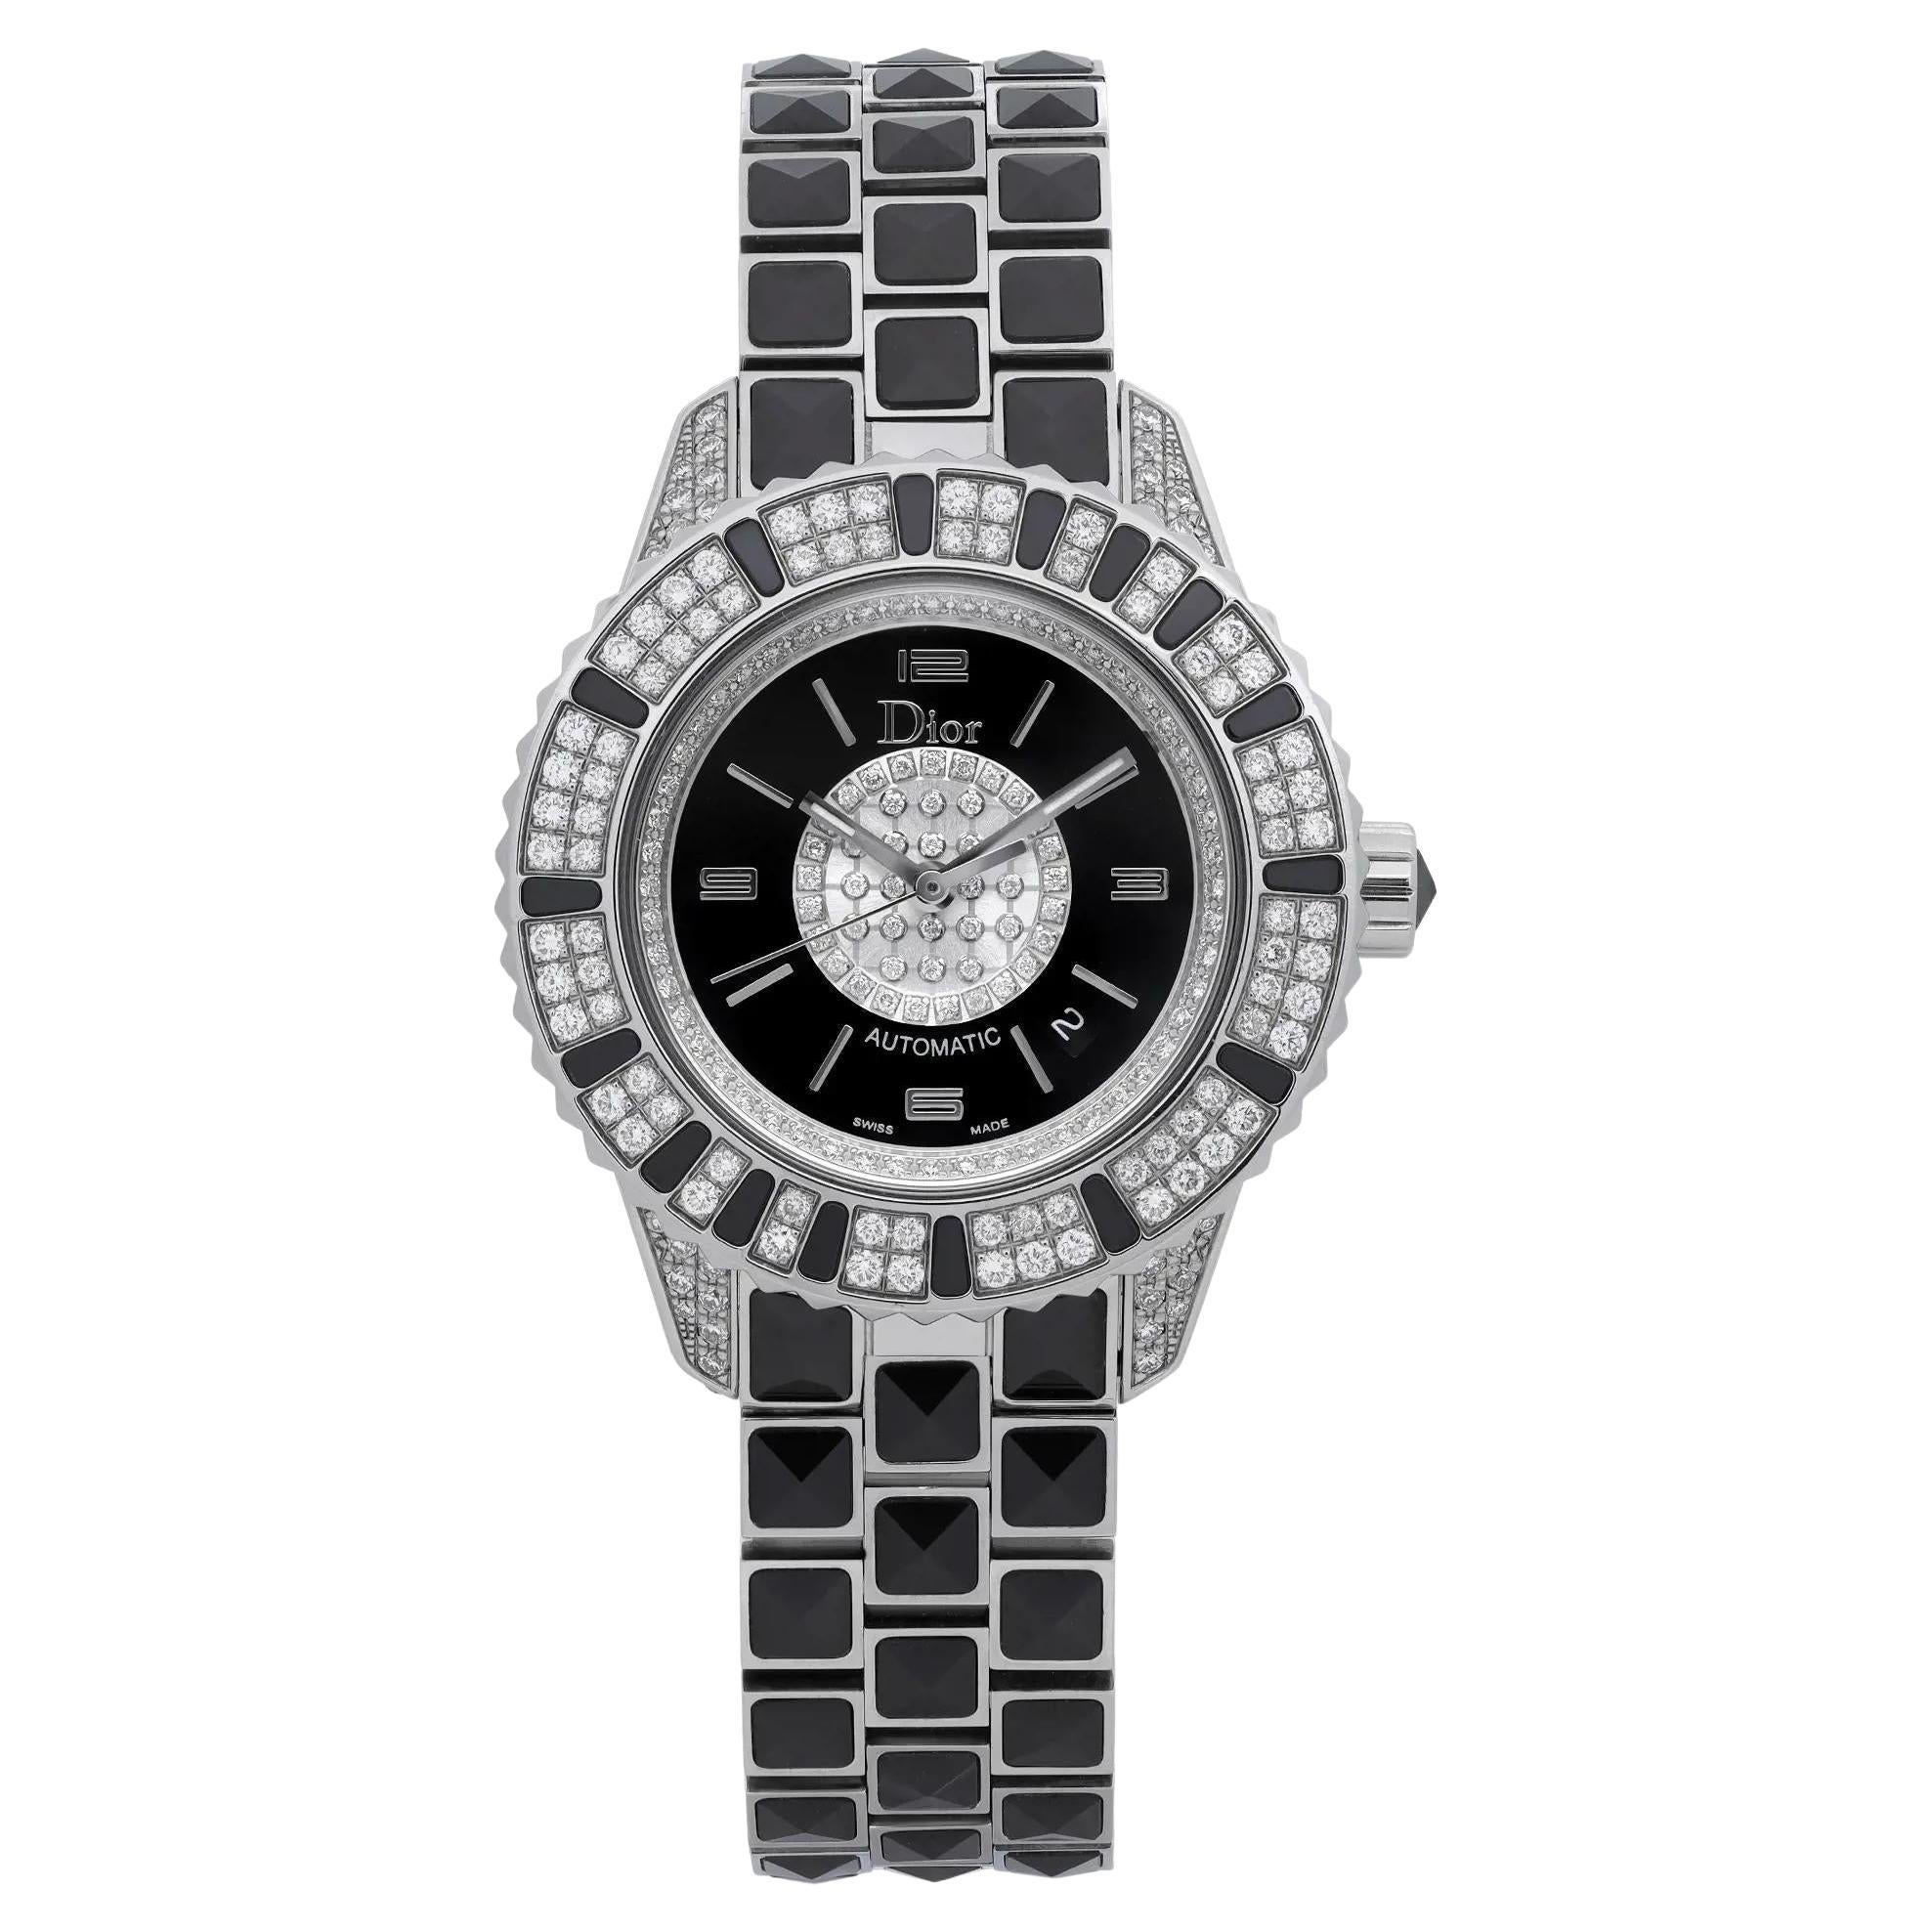 Dior Christal Steel Ceramic Diamond Black Dial Automatic Watch CD113513M001 For Sale